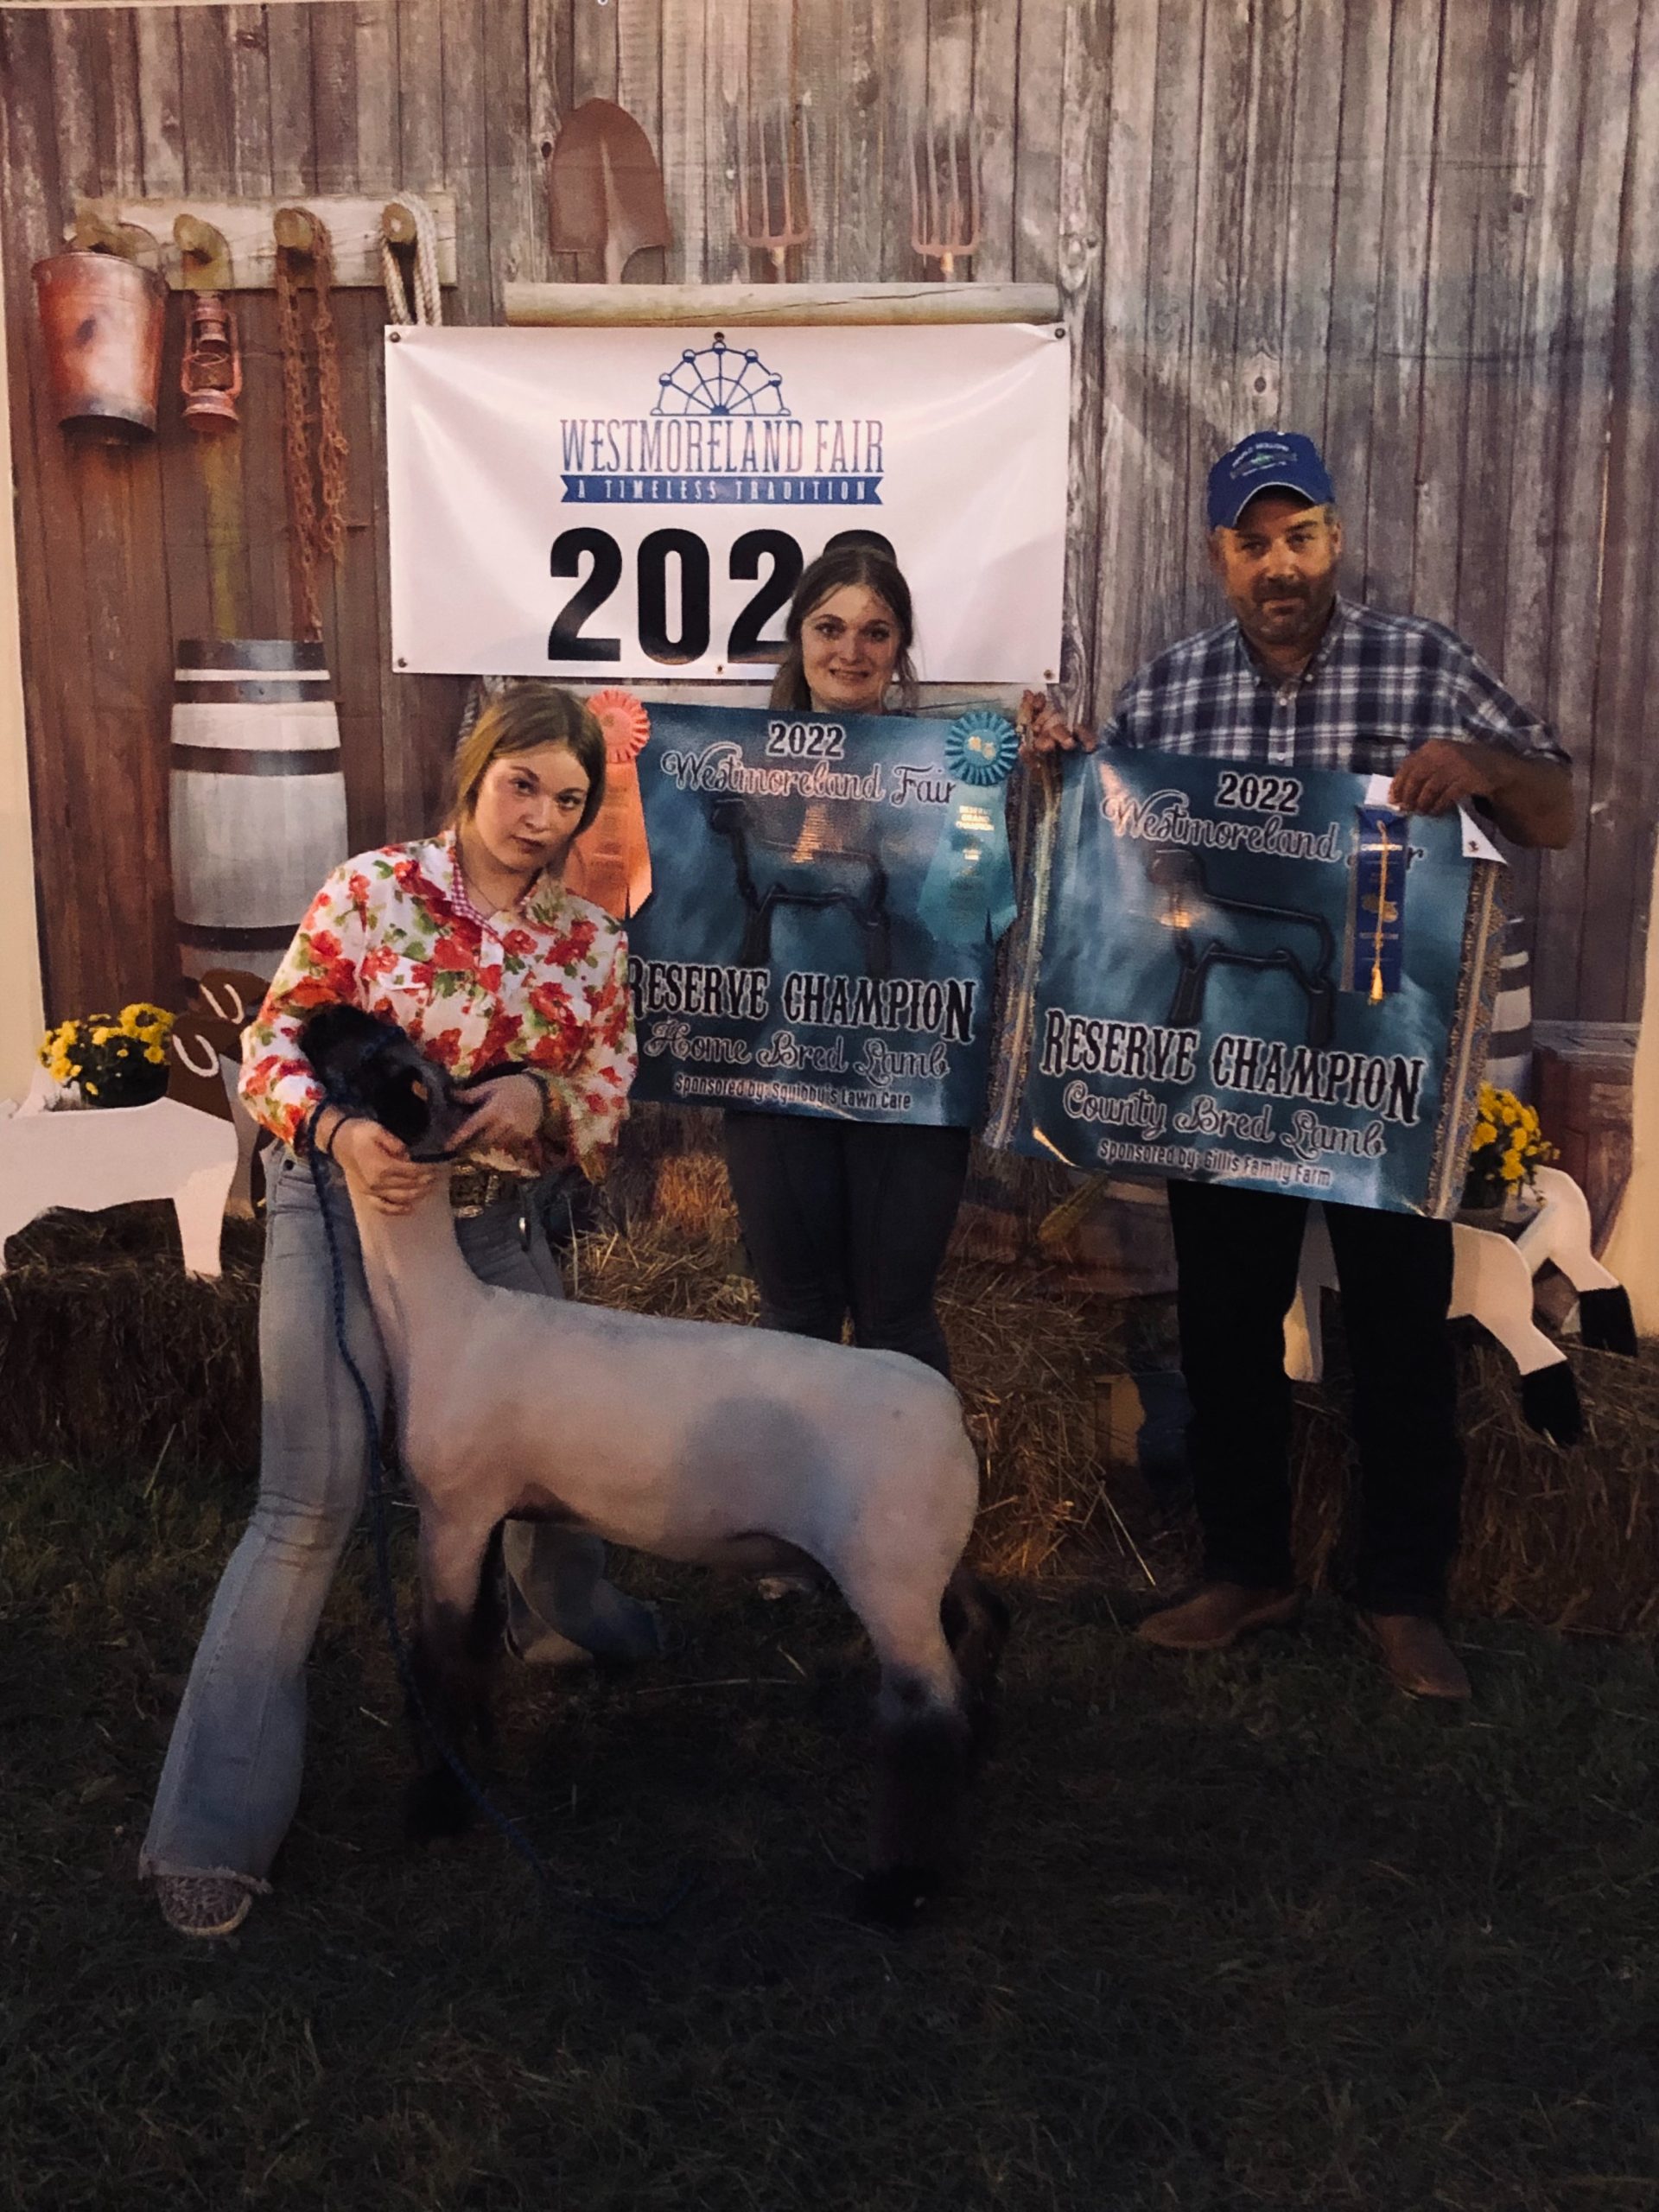 Reserve Champion Home Bred Lamb, 2022 Westmoreland County Fair